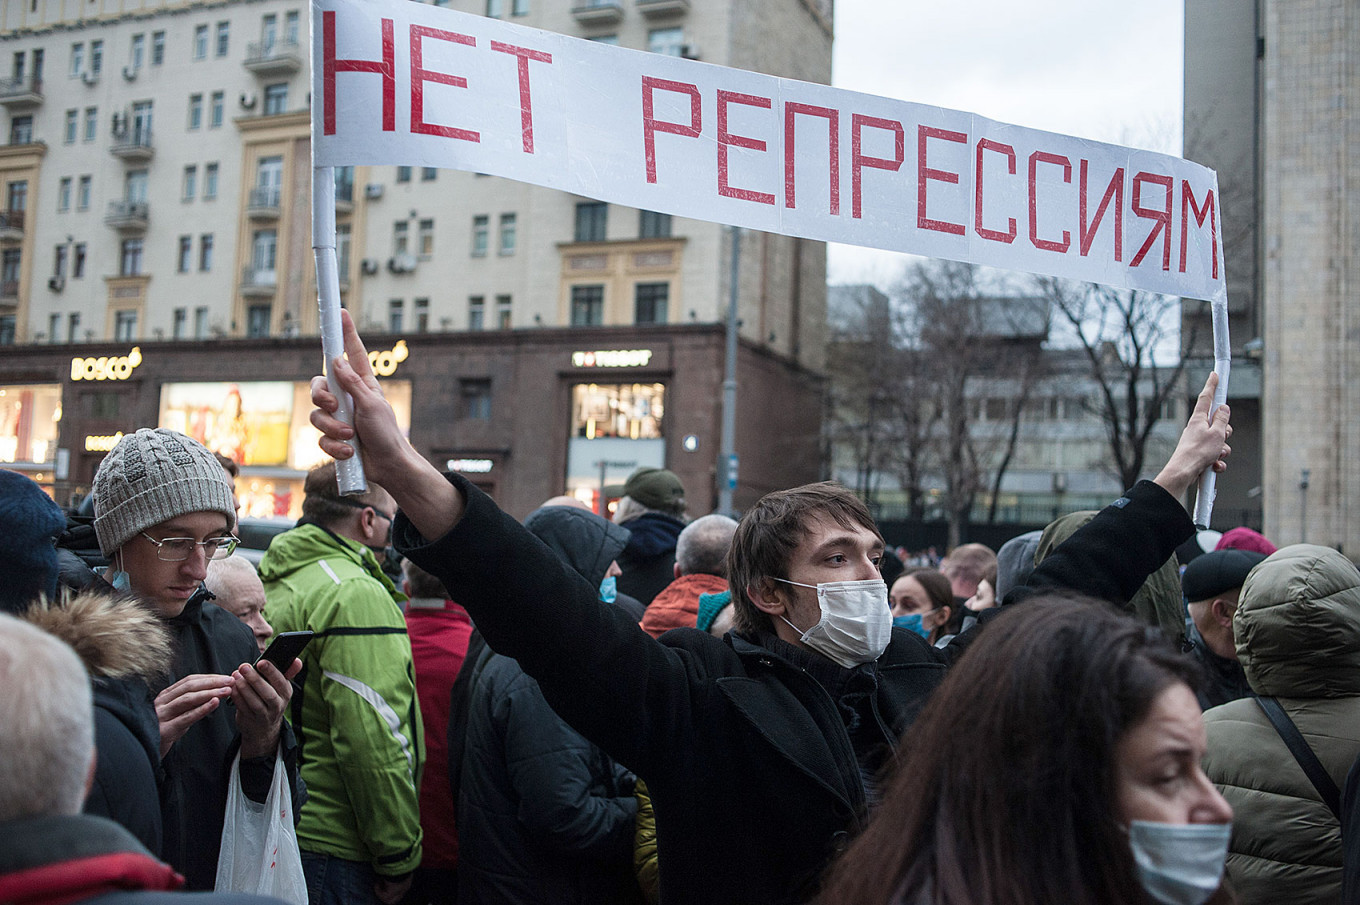 In Photos: Navalny’s Supporters Take to the Streets - The Moscow Times